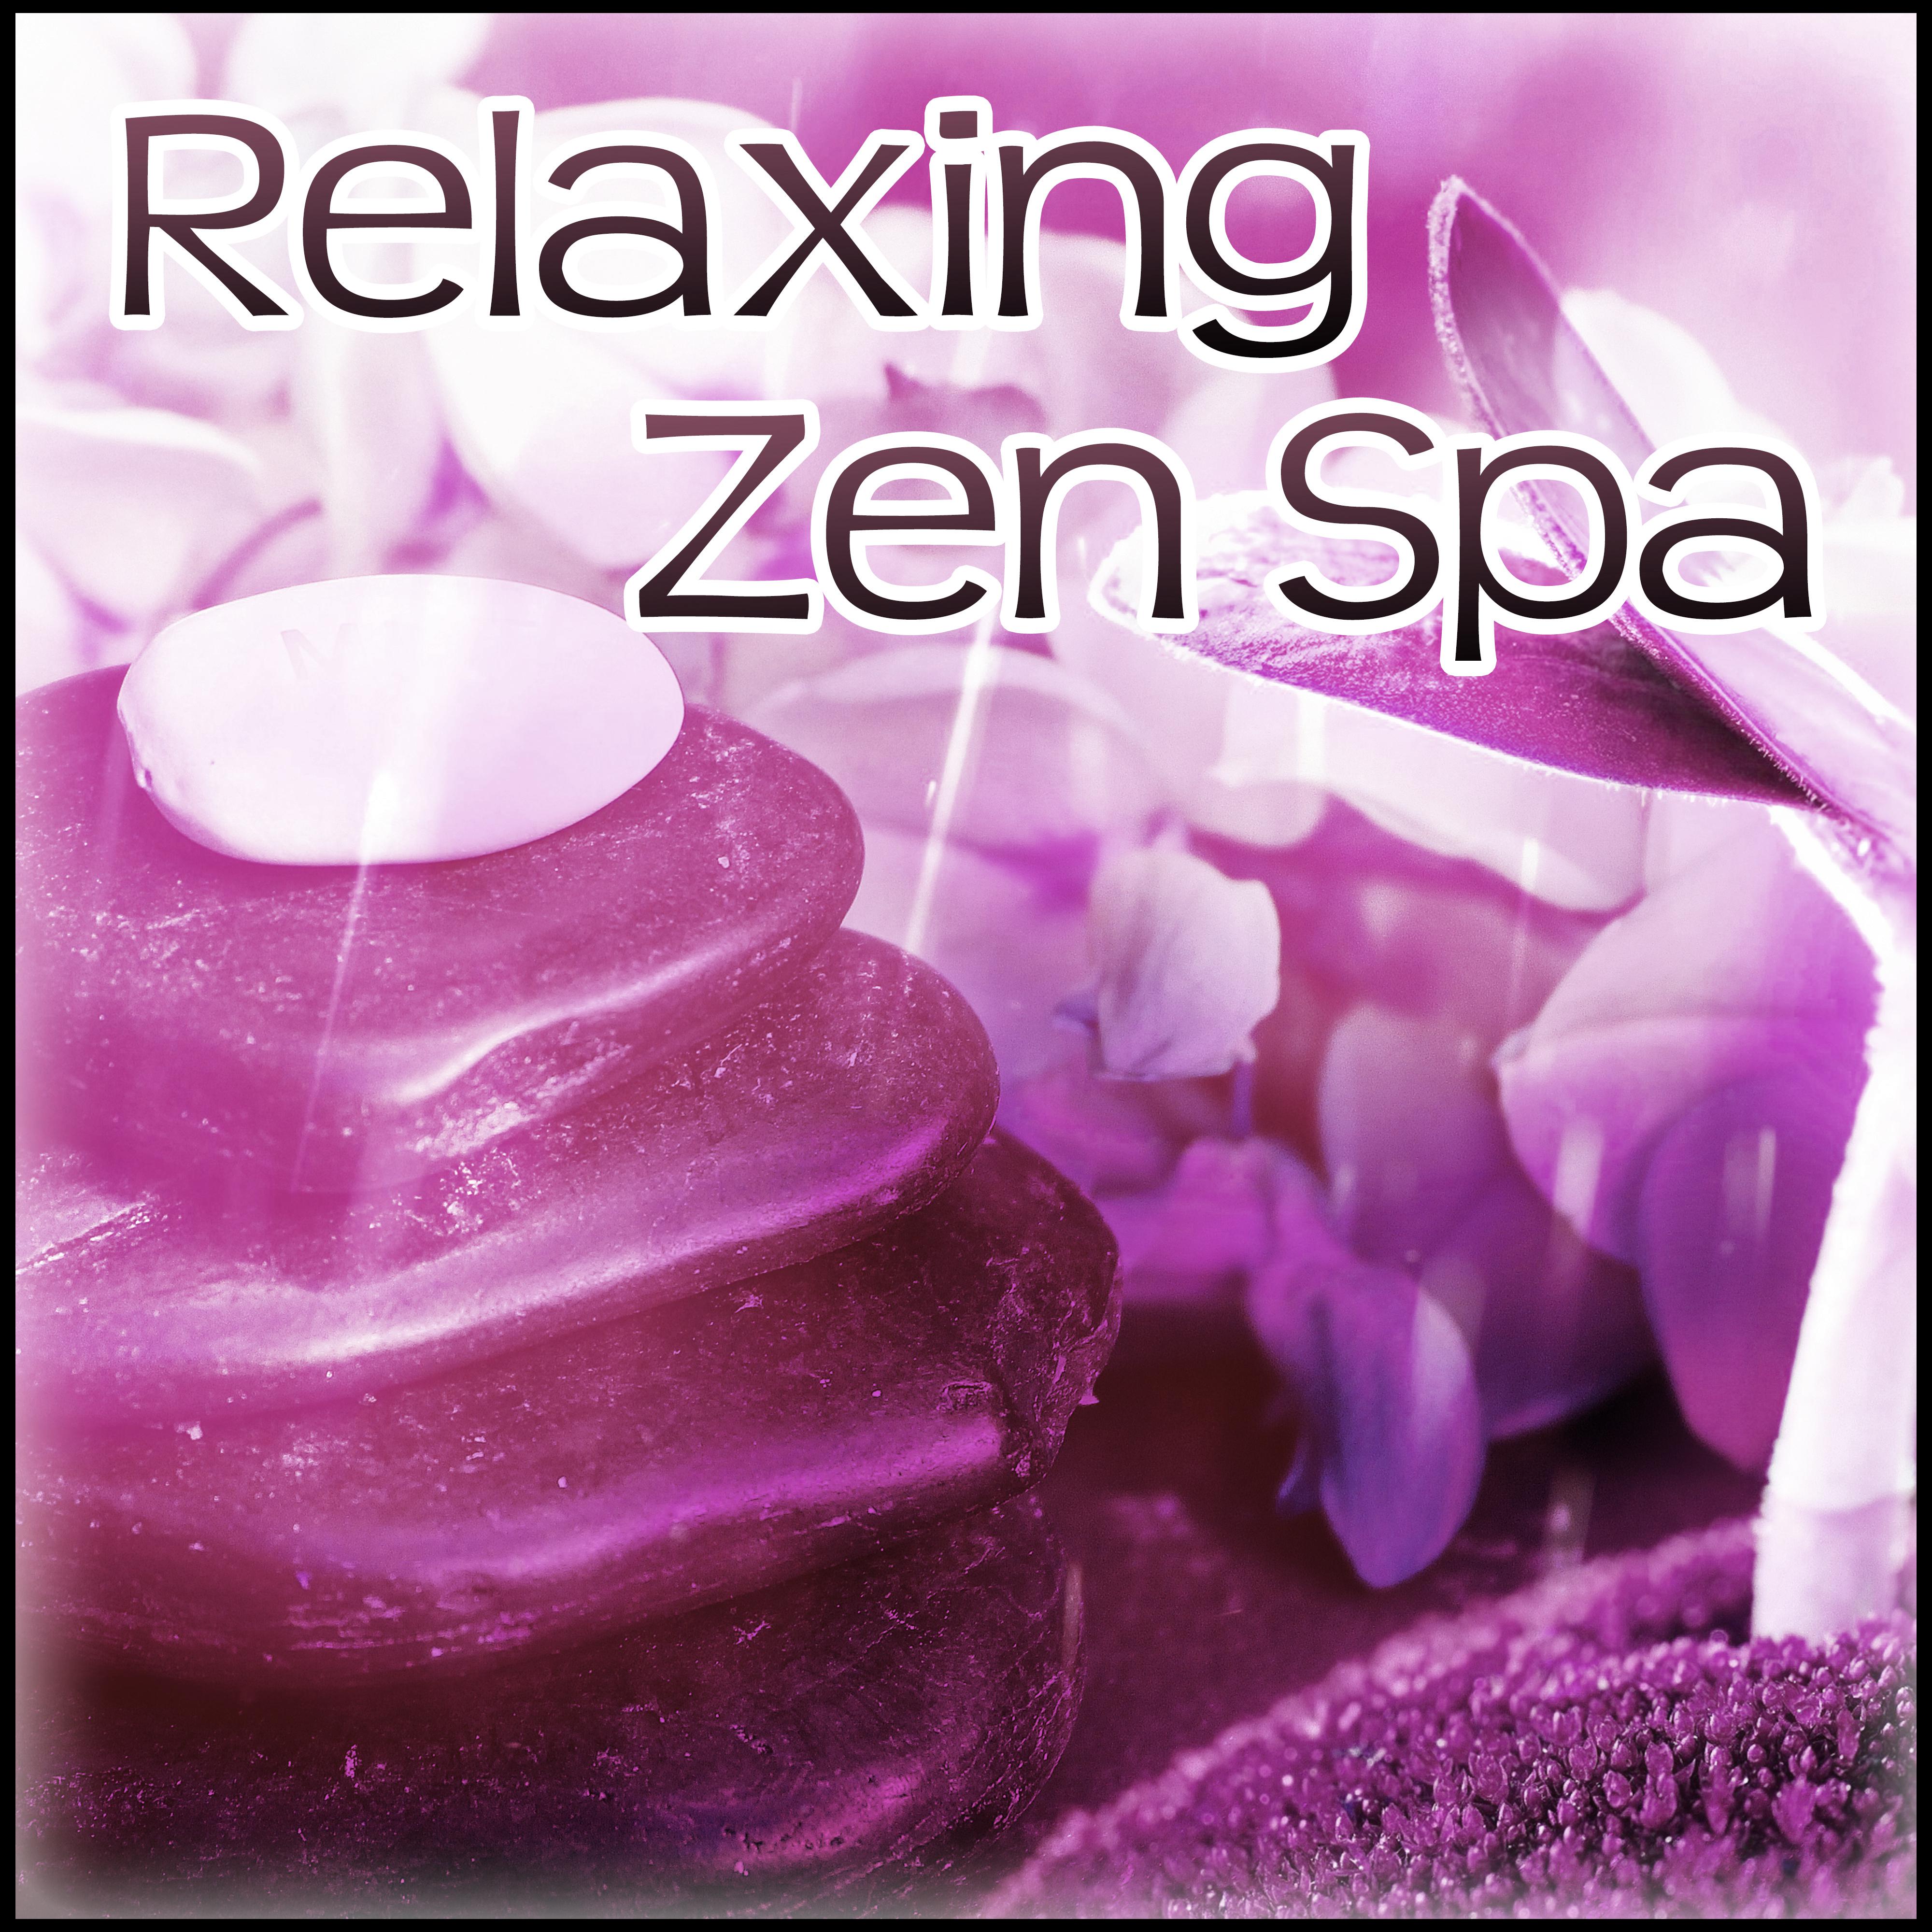 Relaxing Zen Spa – Wellness, Nature Sounds, Reiki, Yoga, Mindfulness, Meditation, Inner Silence, Deep Relaxation, Tranquility Spa